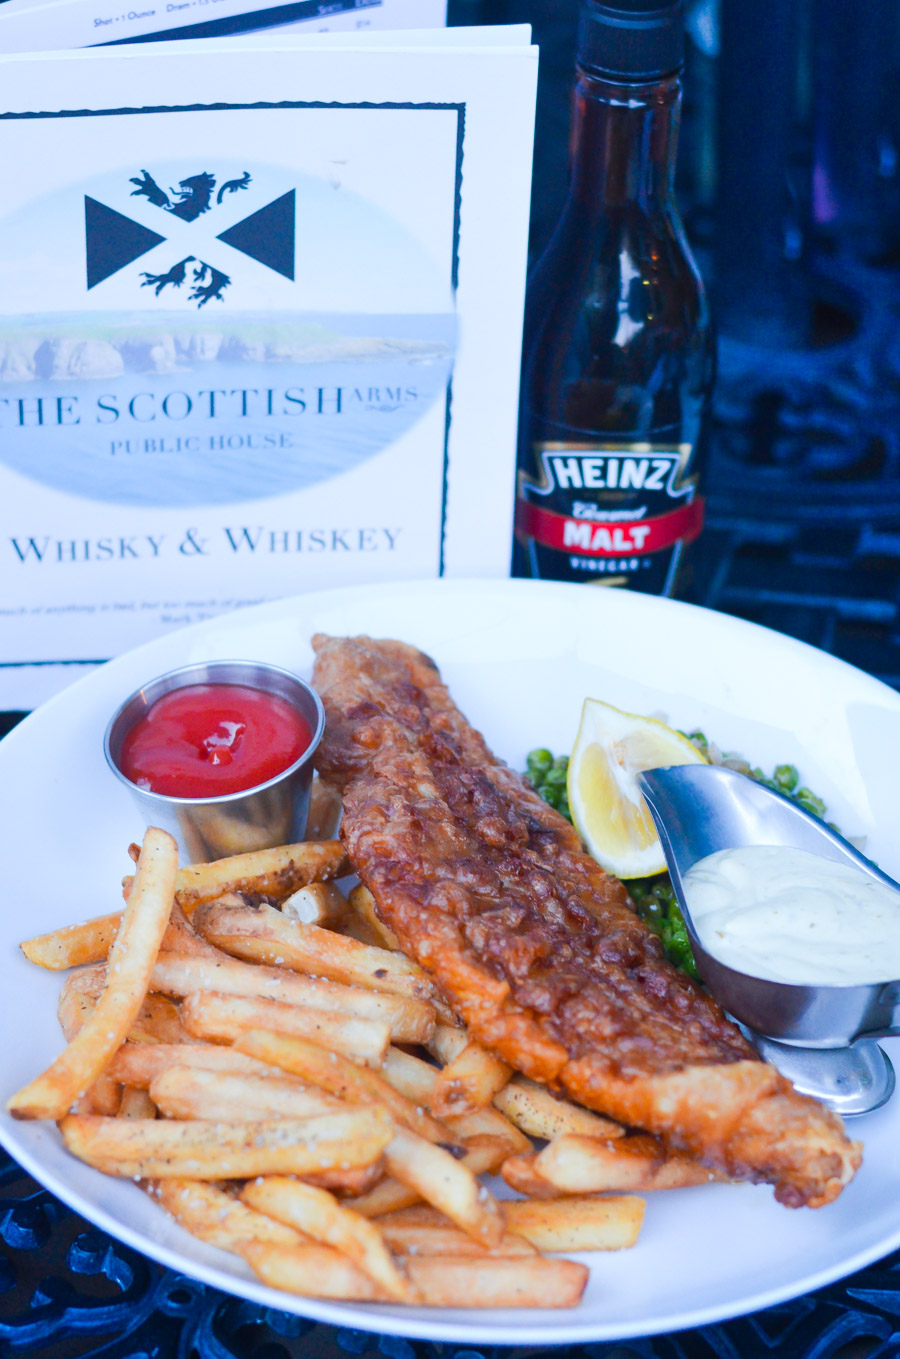 Where to Eat in St. Louis | Restaurant Guide | The Scottish Arms